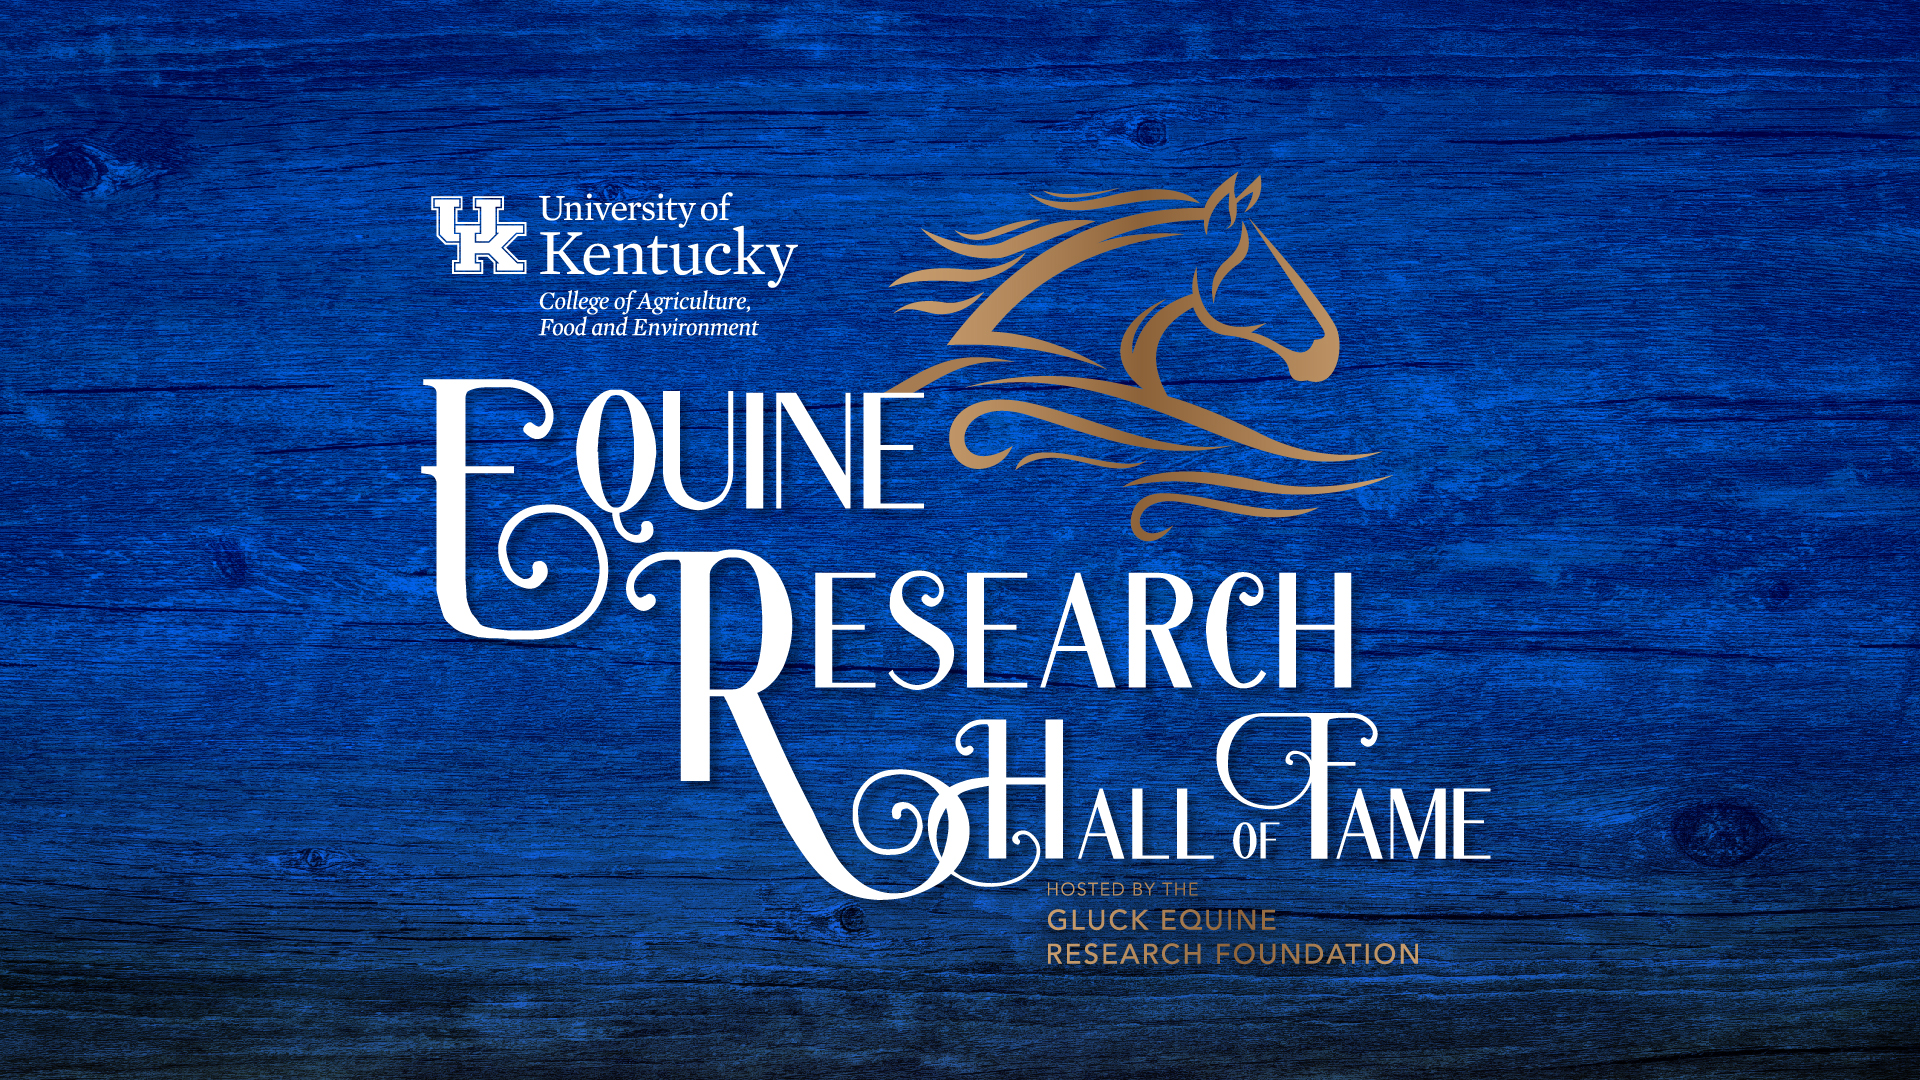 Equine Research Hall of Fame Gluck Equine Research Center University of Kentucky